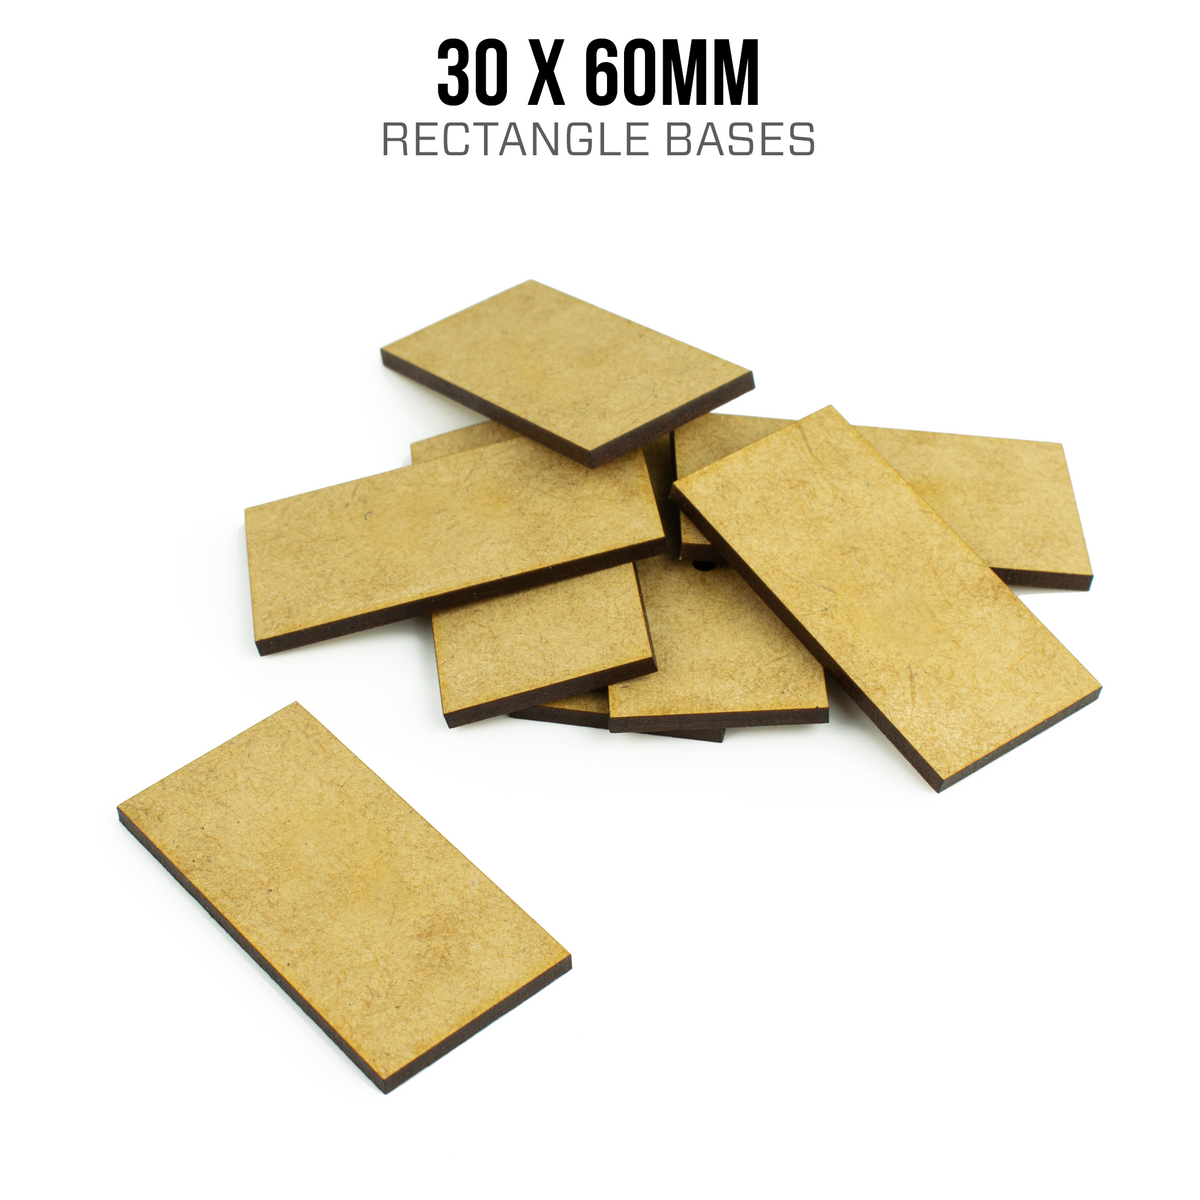 30 x 60mm Rectangle Bases